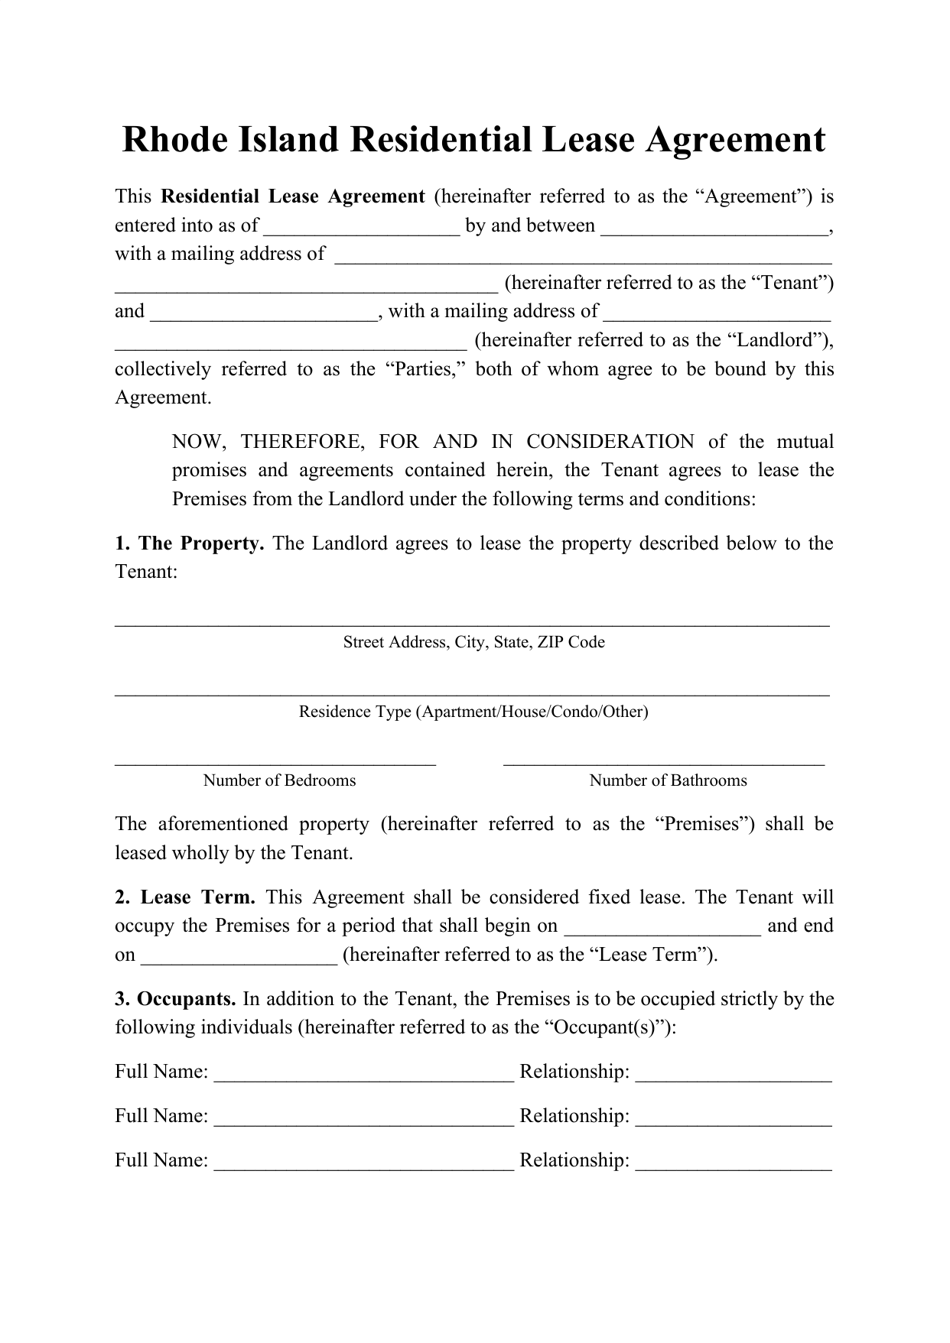 Residential Lease Agreement Template - Rhode Island, Page 1